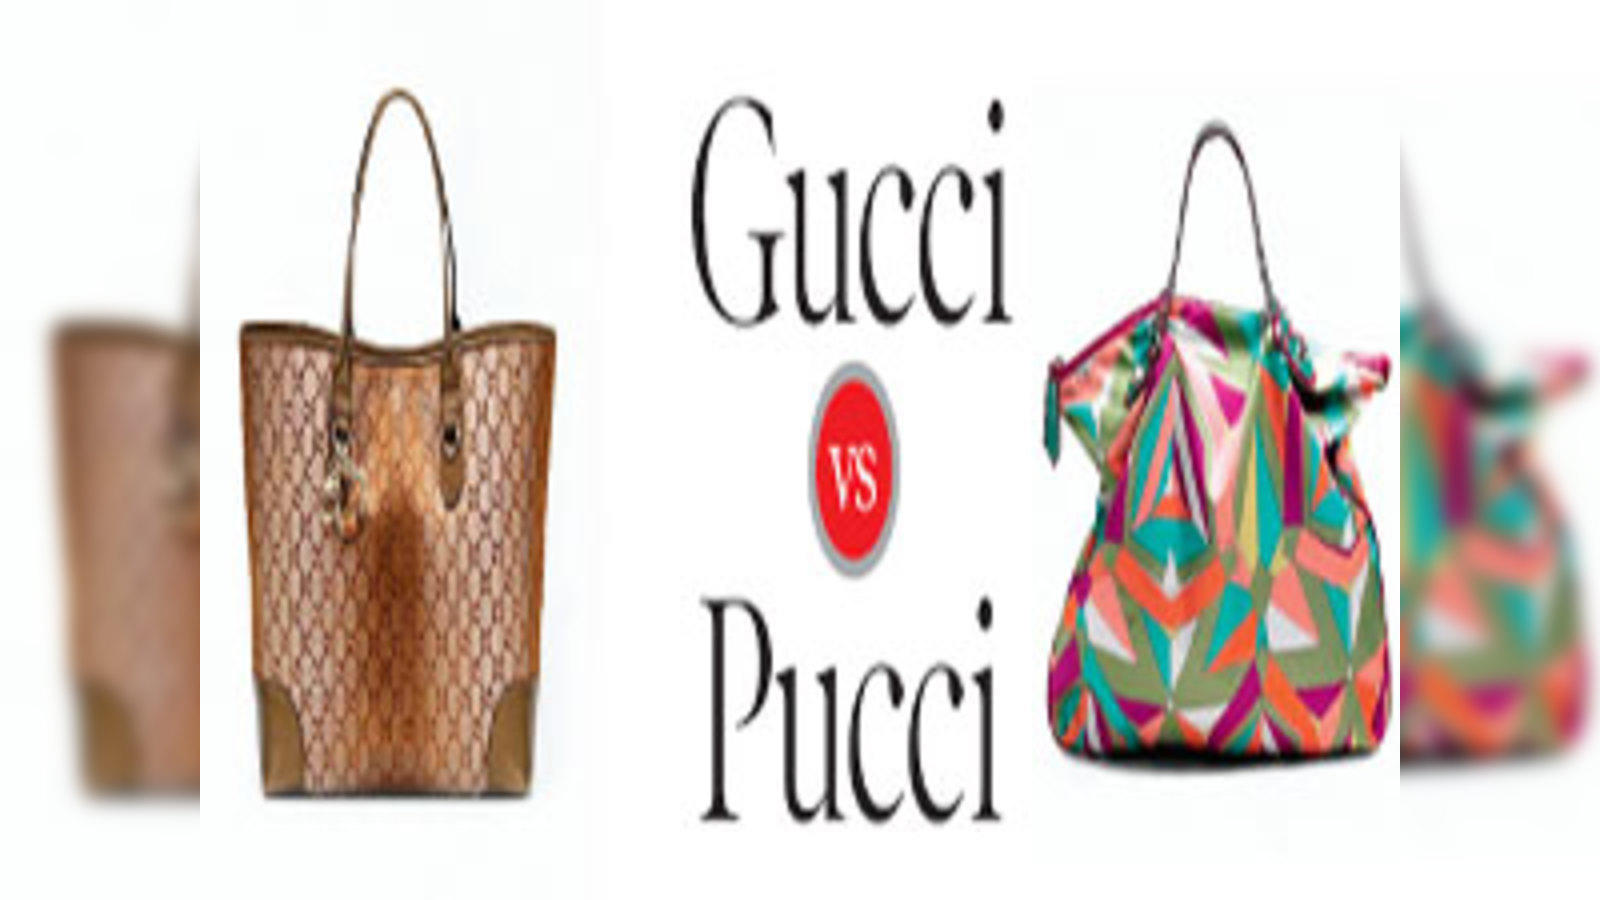 Could Gucci become bigger than Louis Vuitton?